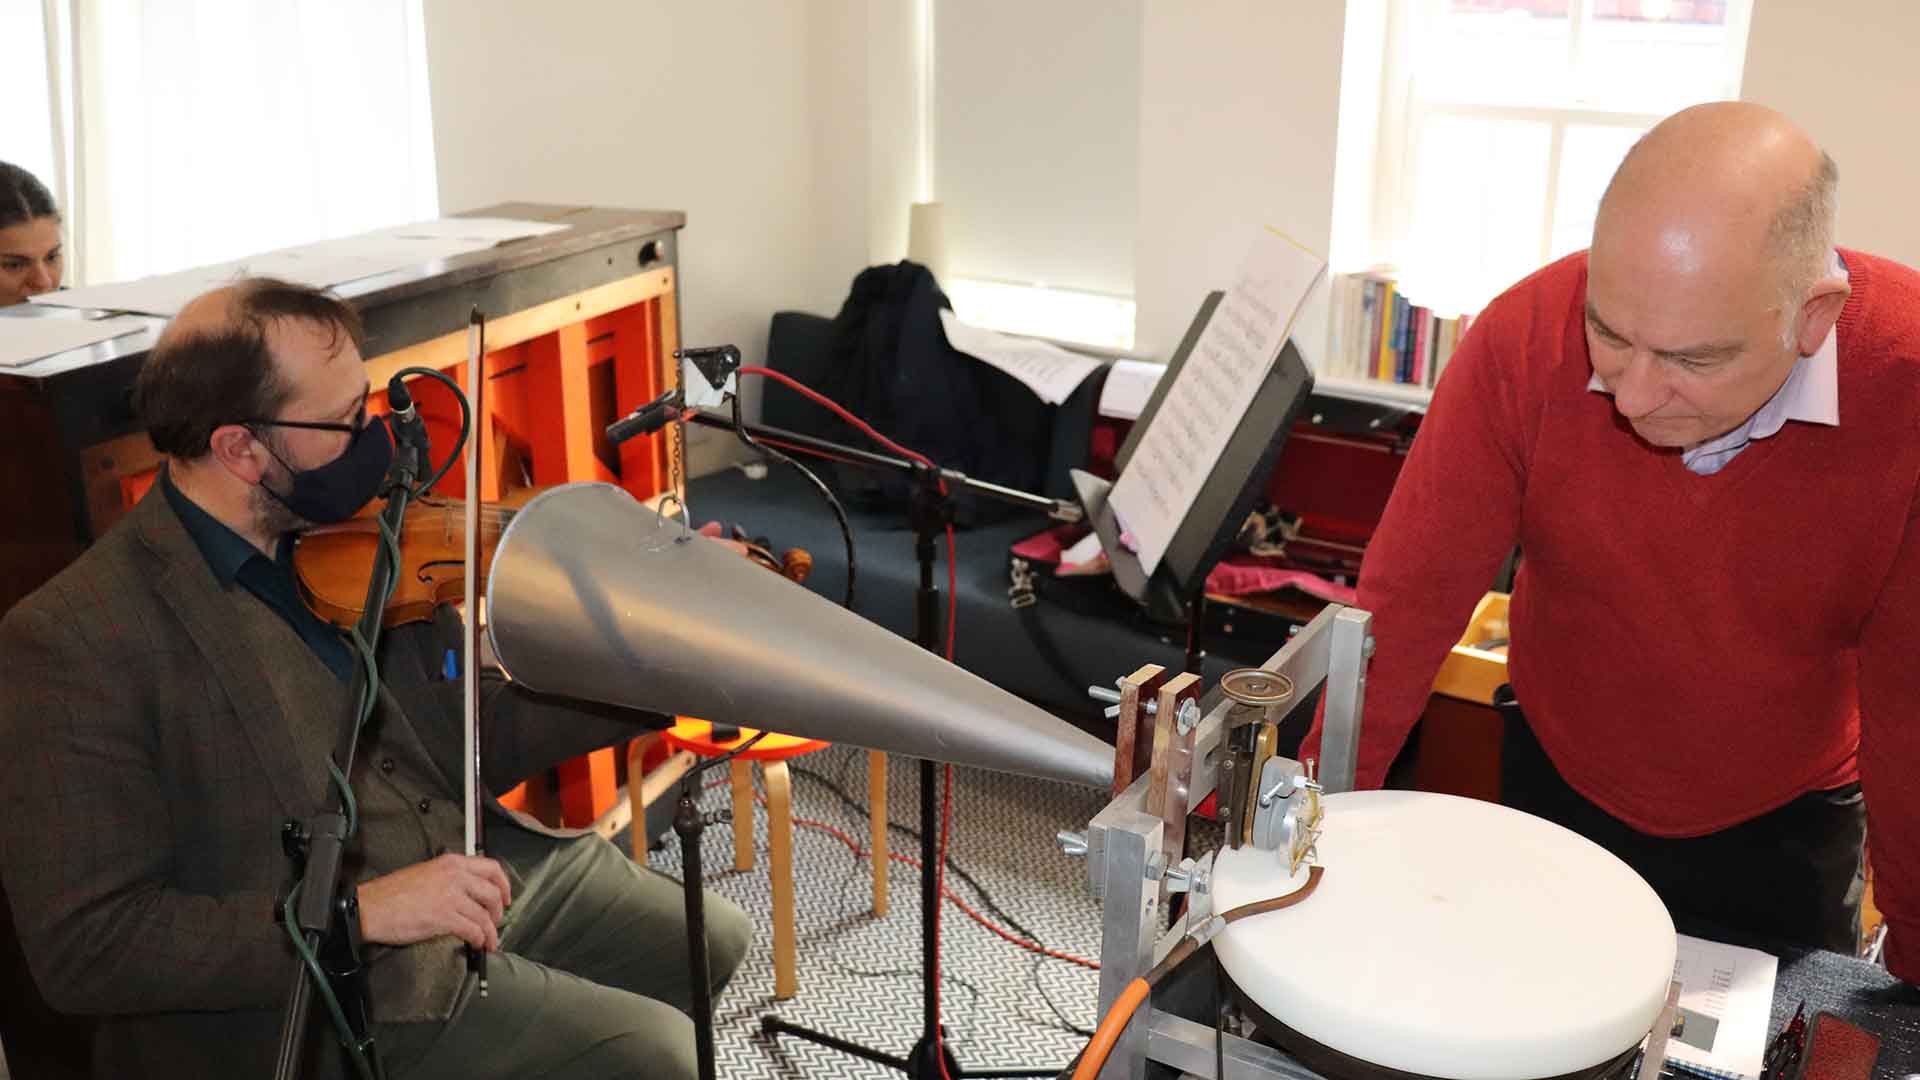 Musicians using old recording technology in a studio